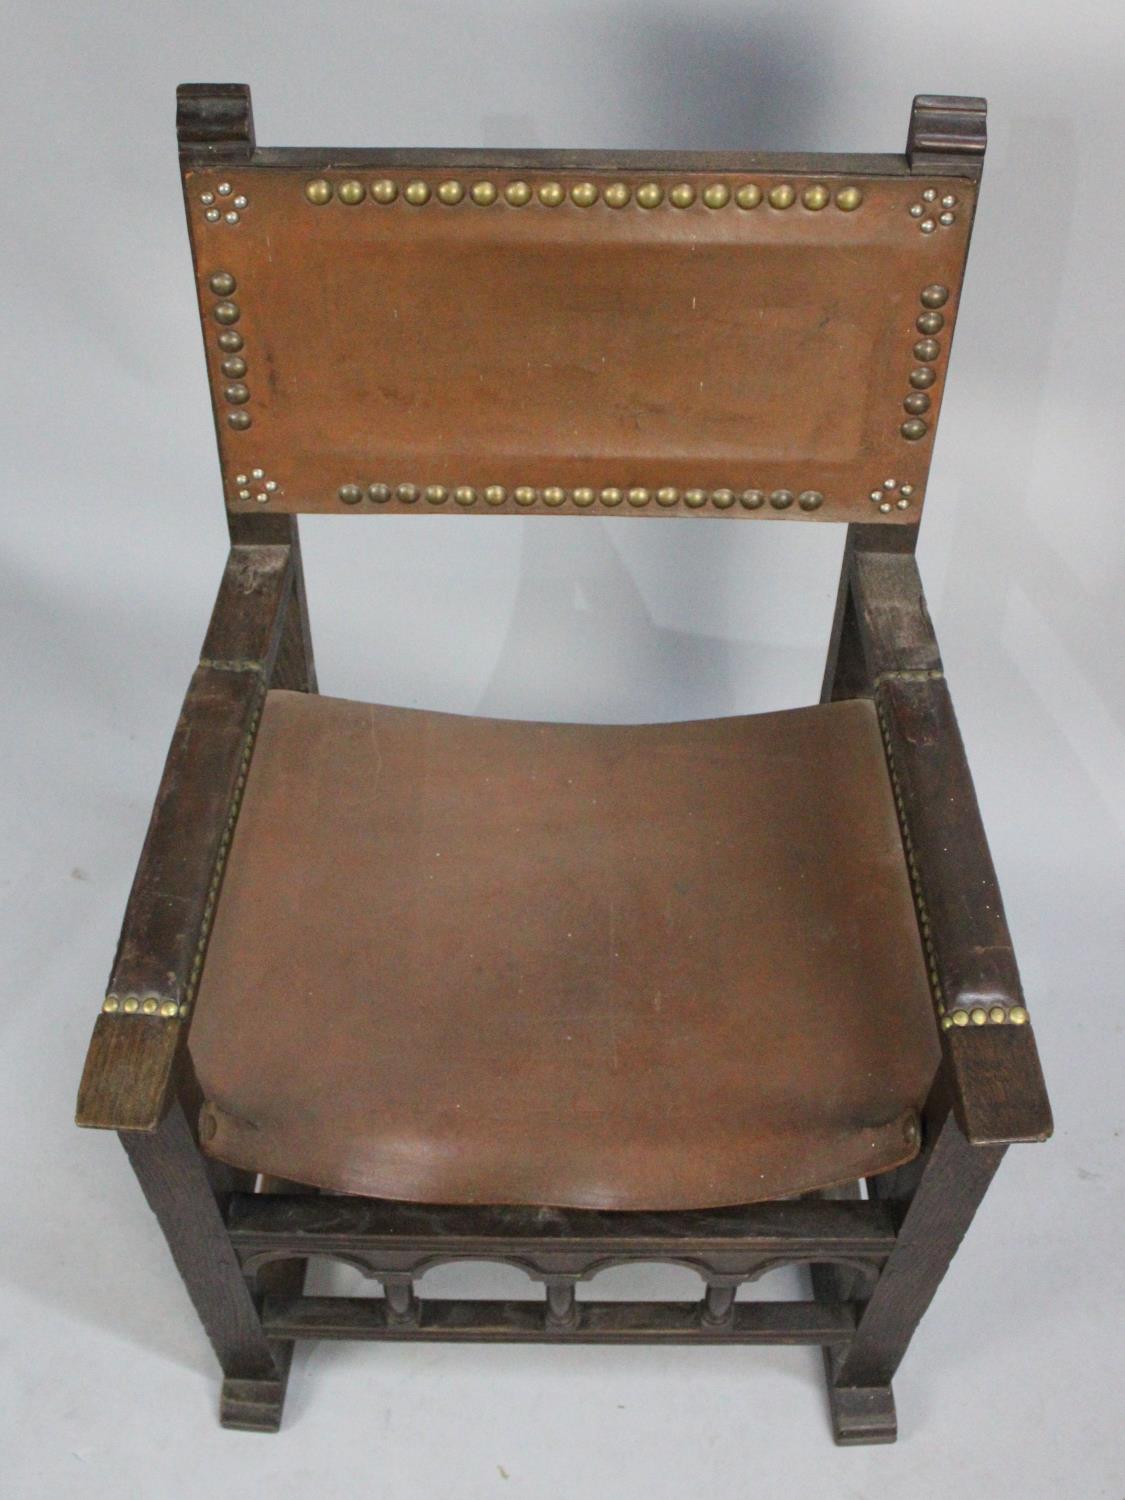 An Edwardian Oak Framed Armada Style Chair with Brass Studded Leather Arms and Back - Image 2 of 2